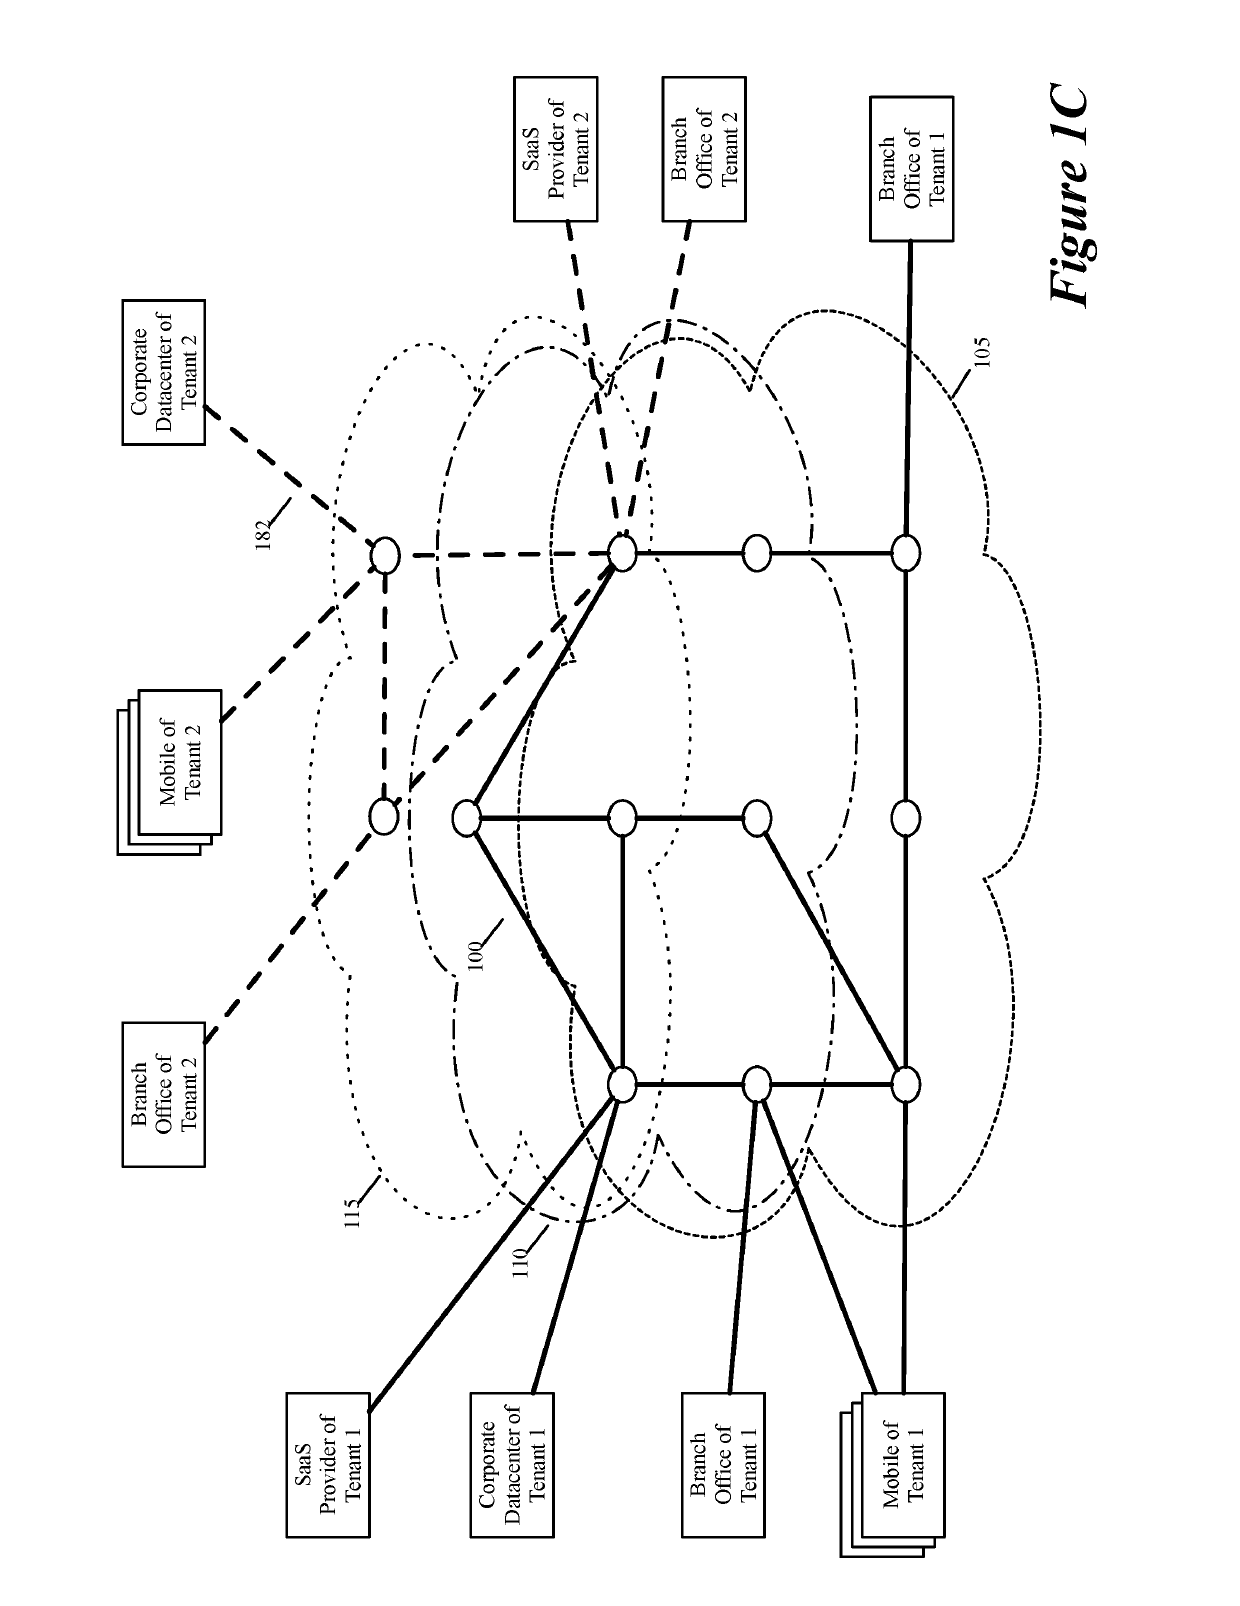 Processing data messages of a virtual network that are sent to and received from external service machines